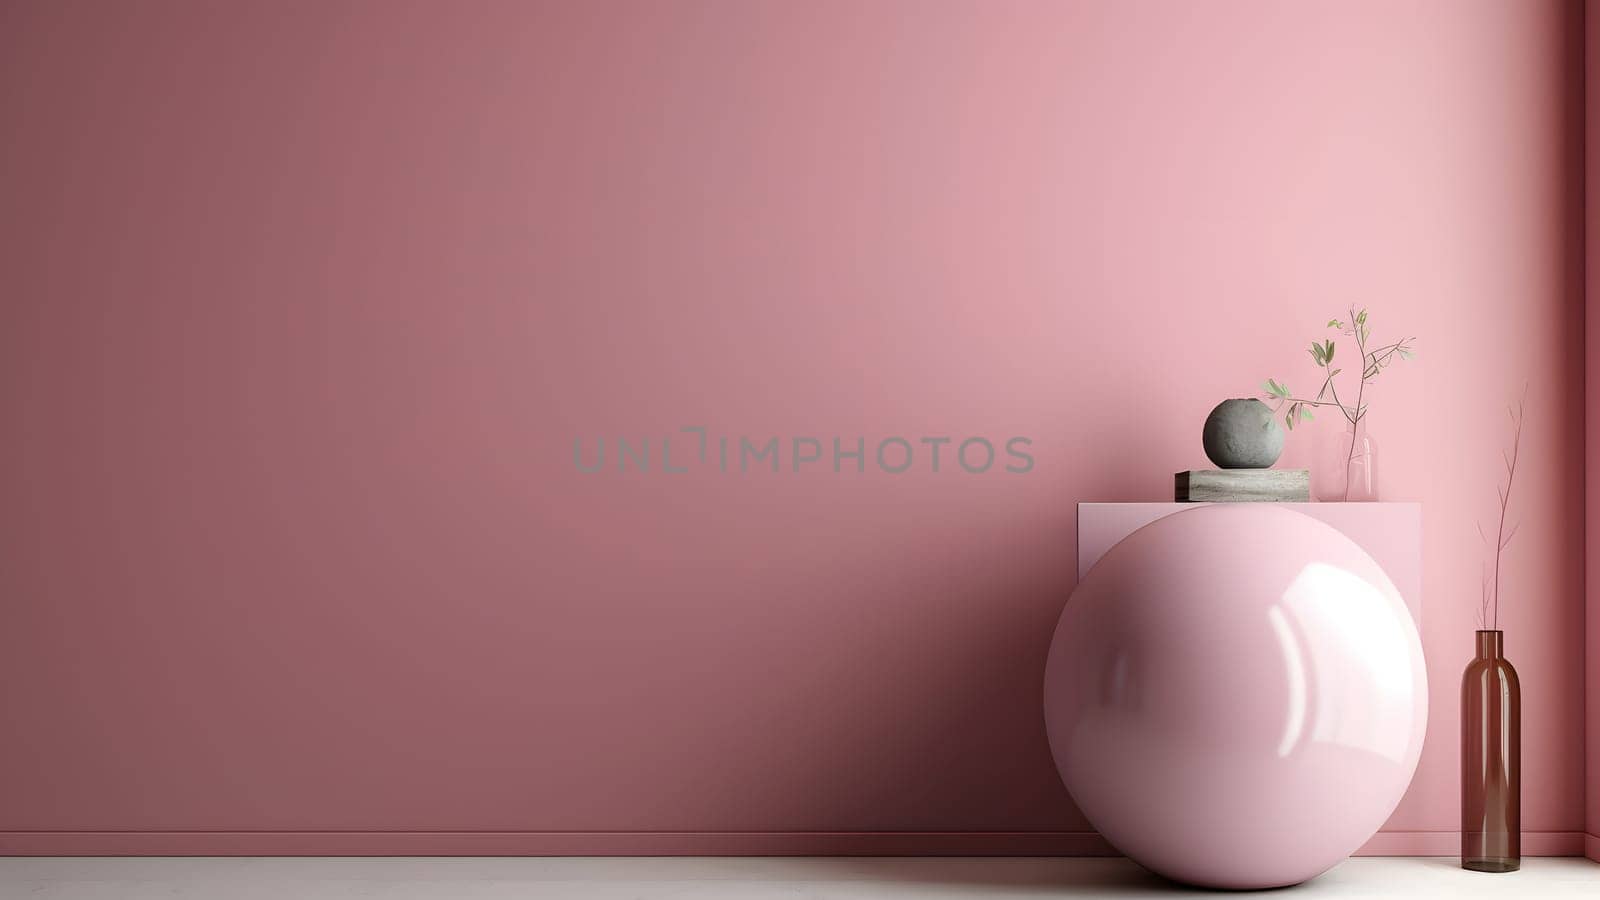 minimalistic composition scene with pastel pink ball on white floor and coral pink wall near a vase with green plant. Neural network generated in May 2023. Not based on any actual scene or pattern.